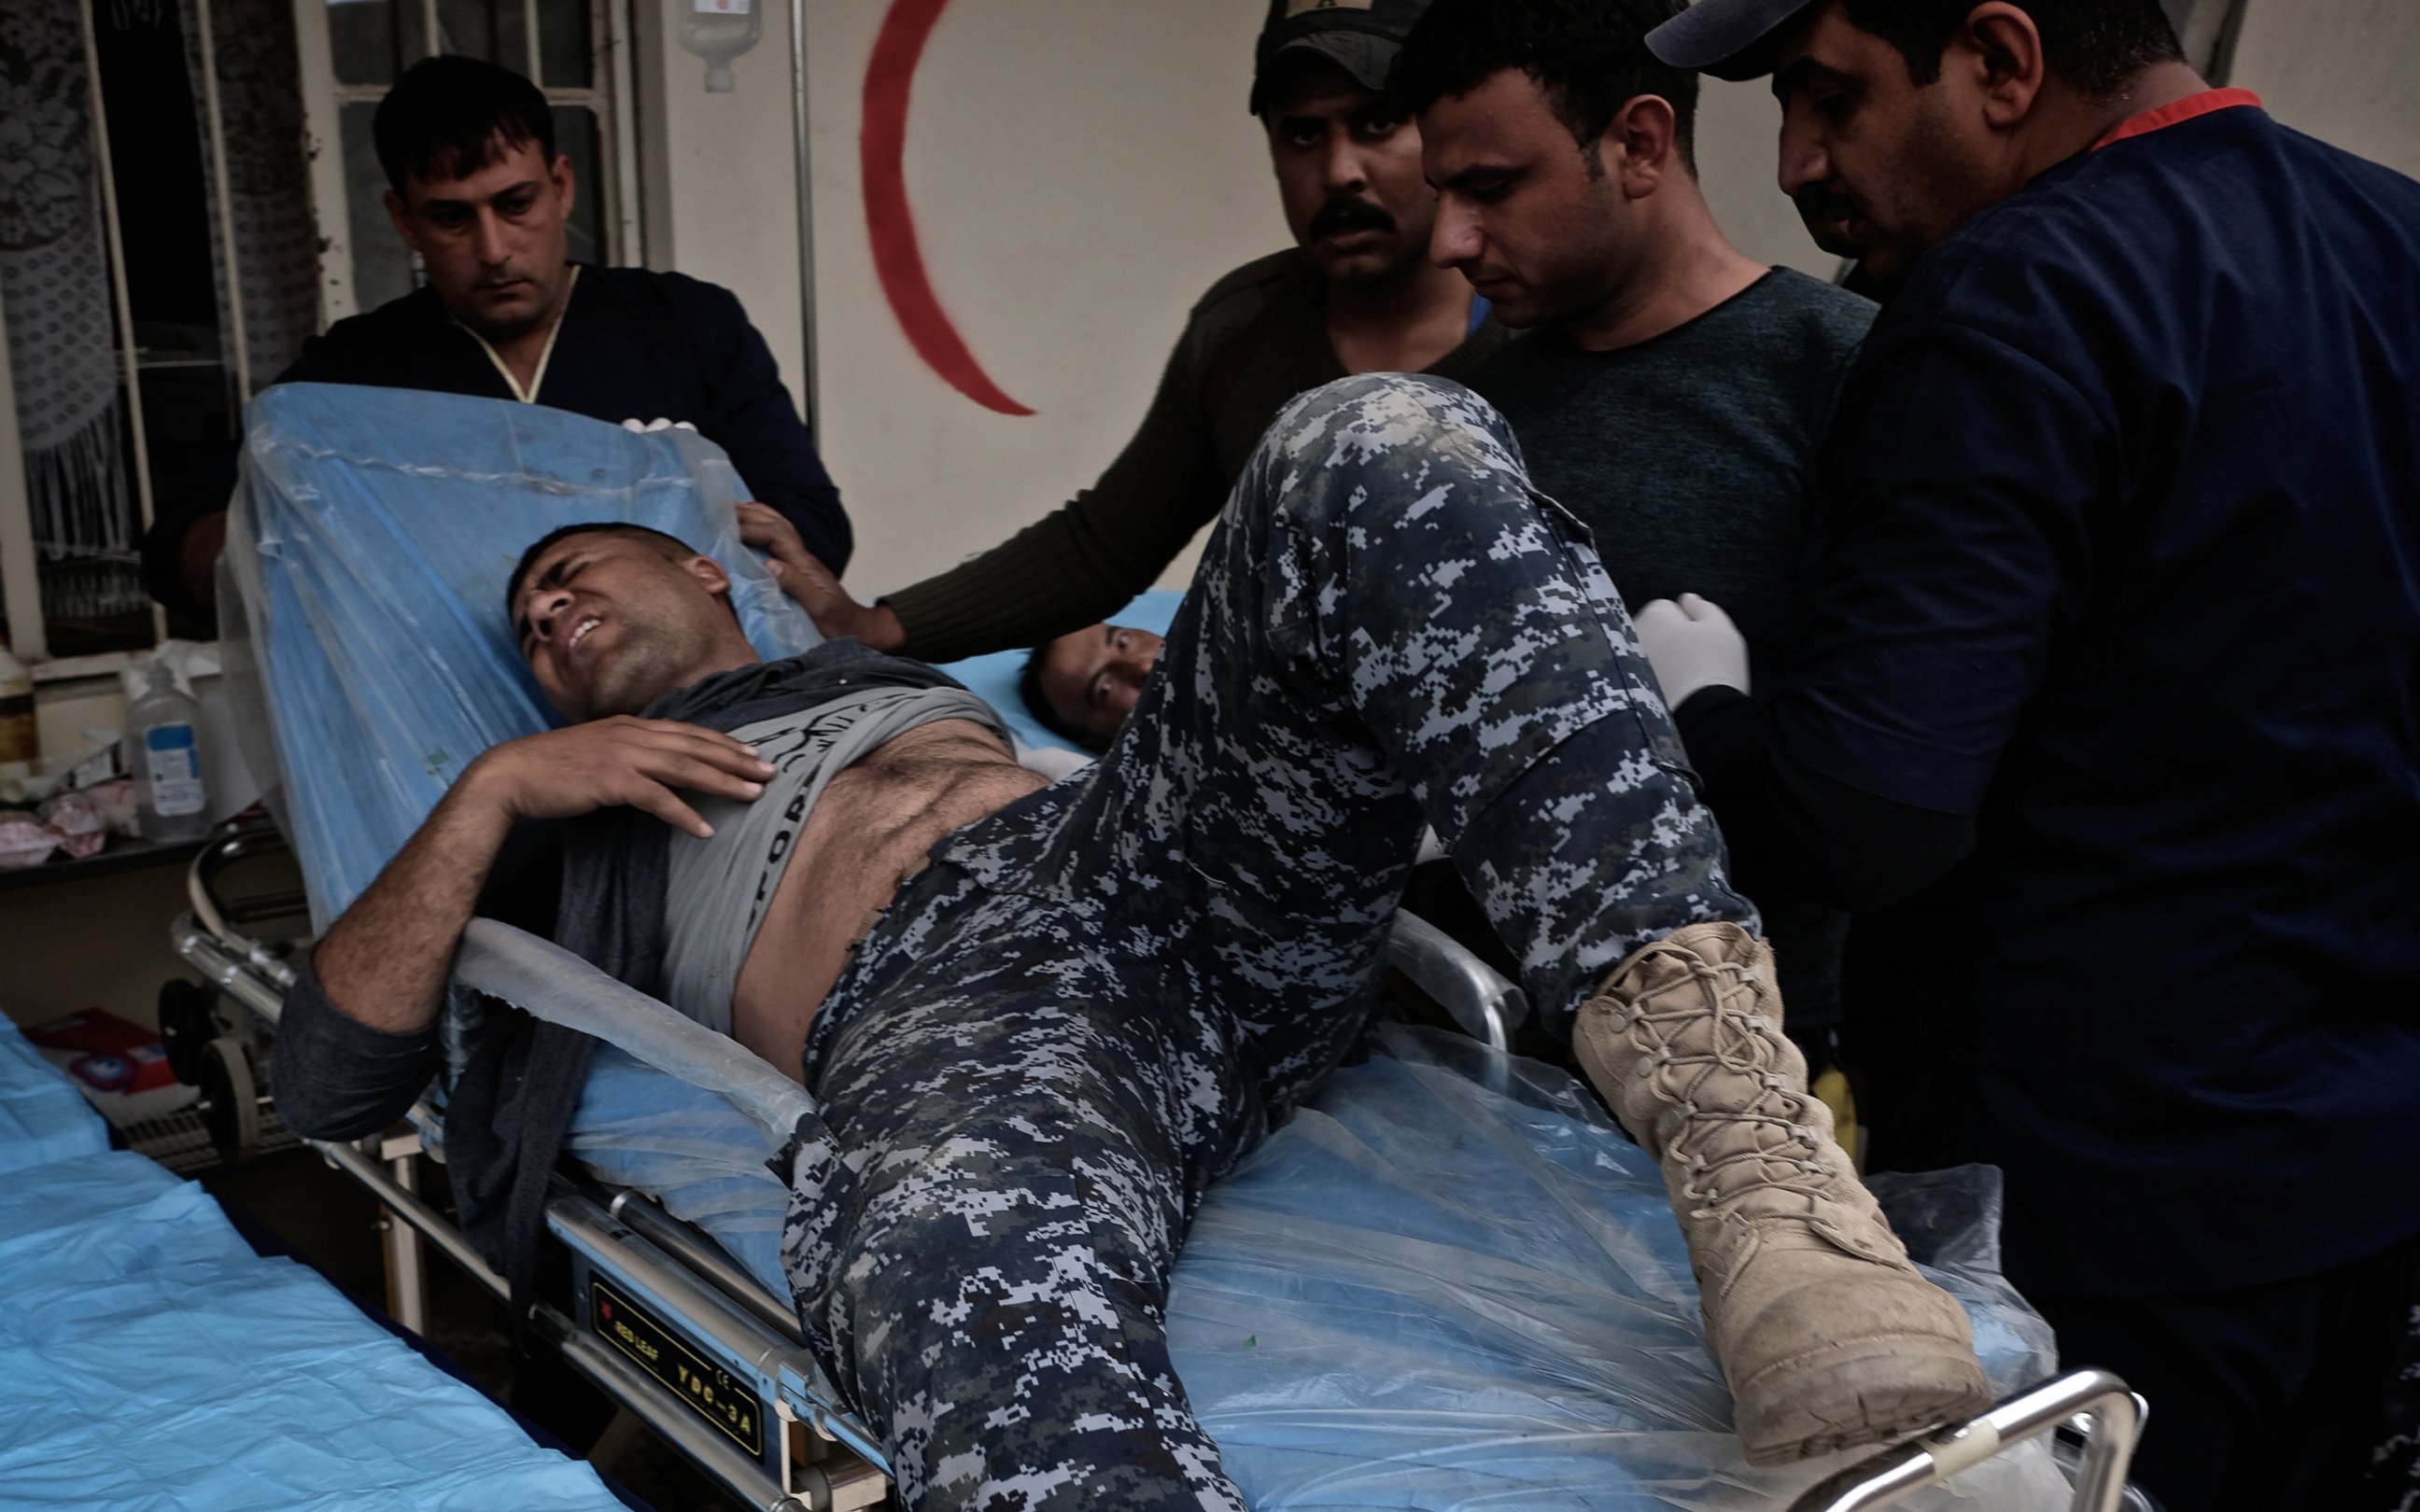 PHOTO: An police officer is badly wounded with burns from an ISIS suicide car bomb attack in the Mahallat al Jawsaq neighborhood of Mosul, Iraq on March 1, 2017.